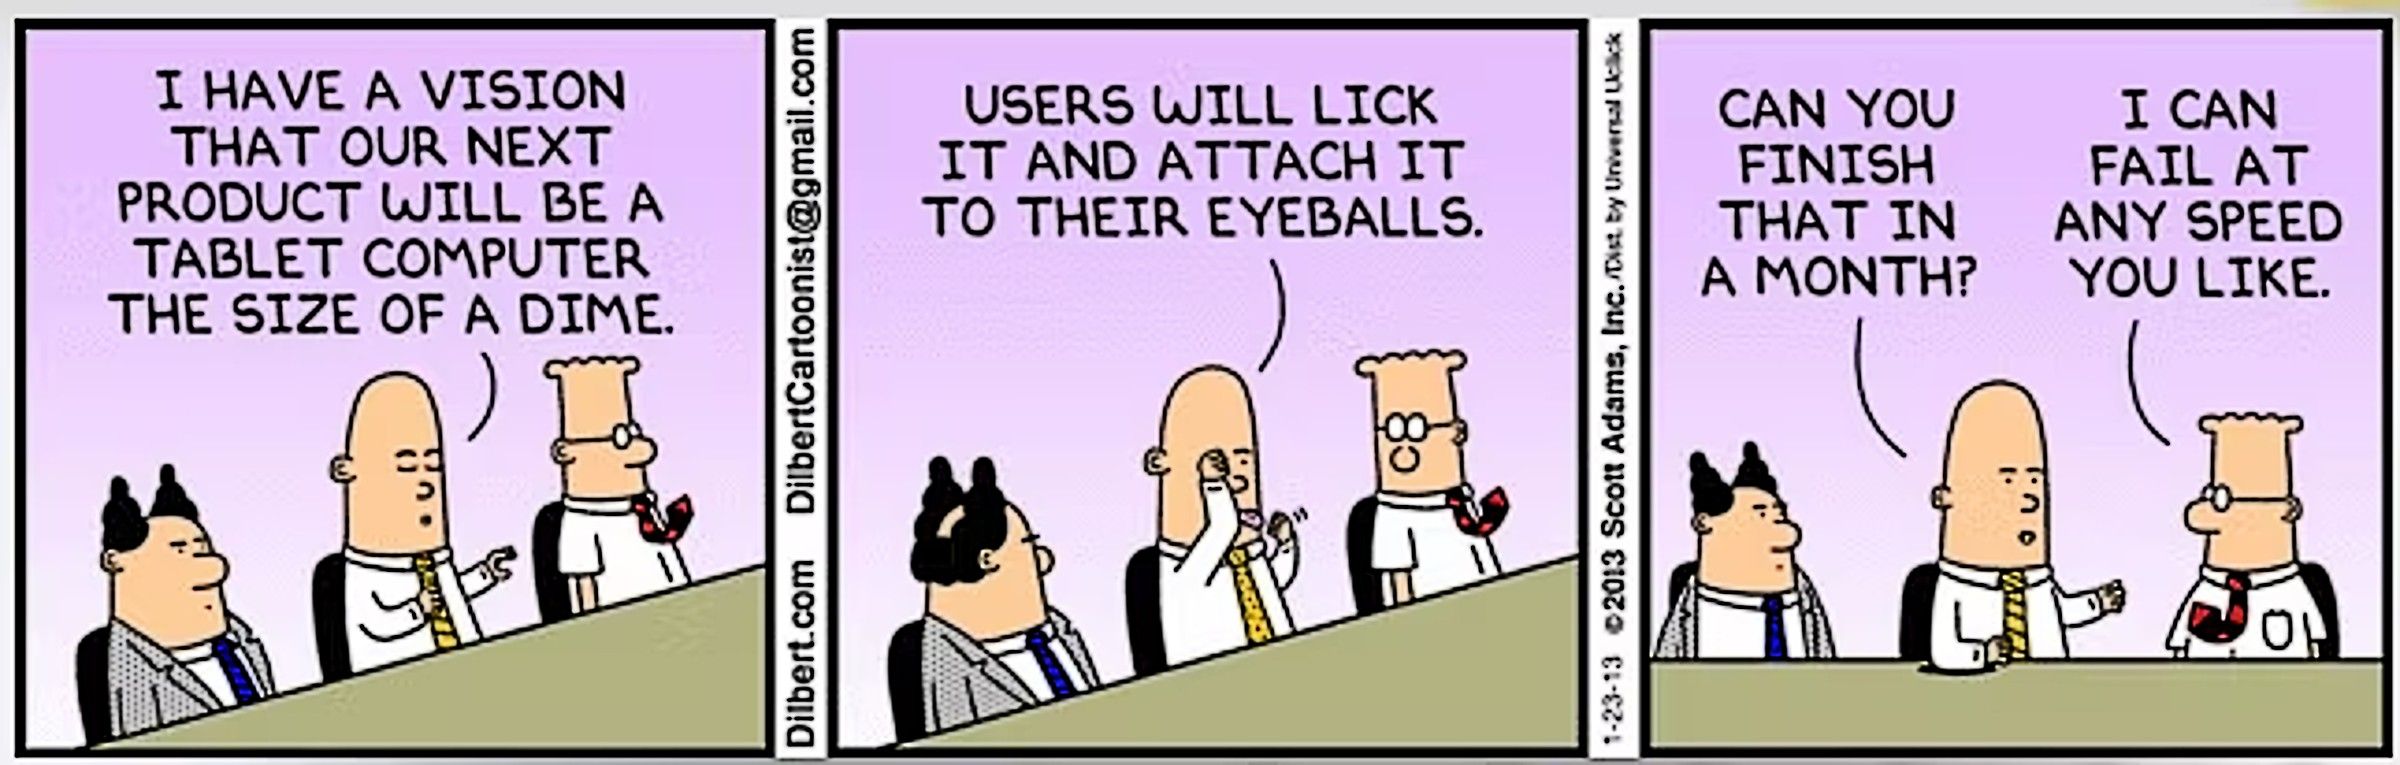 Dilbert's coworker can fail at any speed